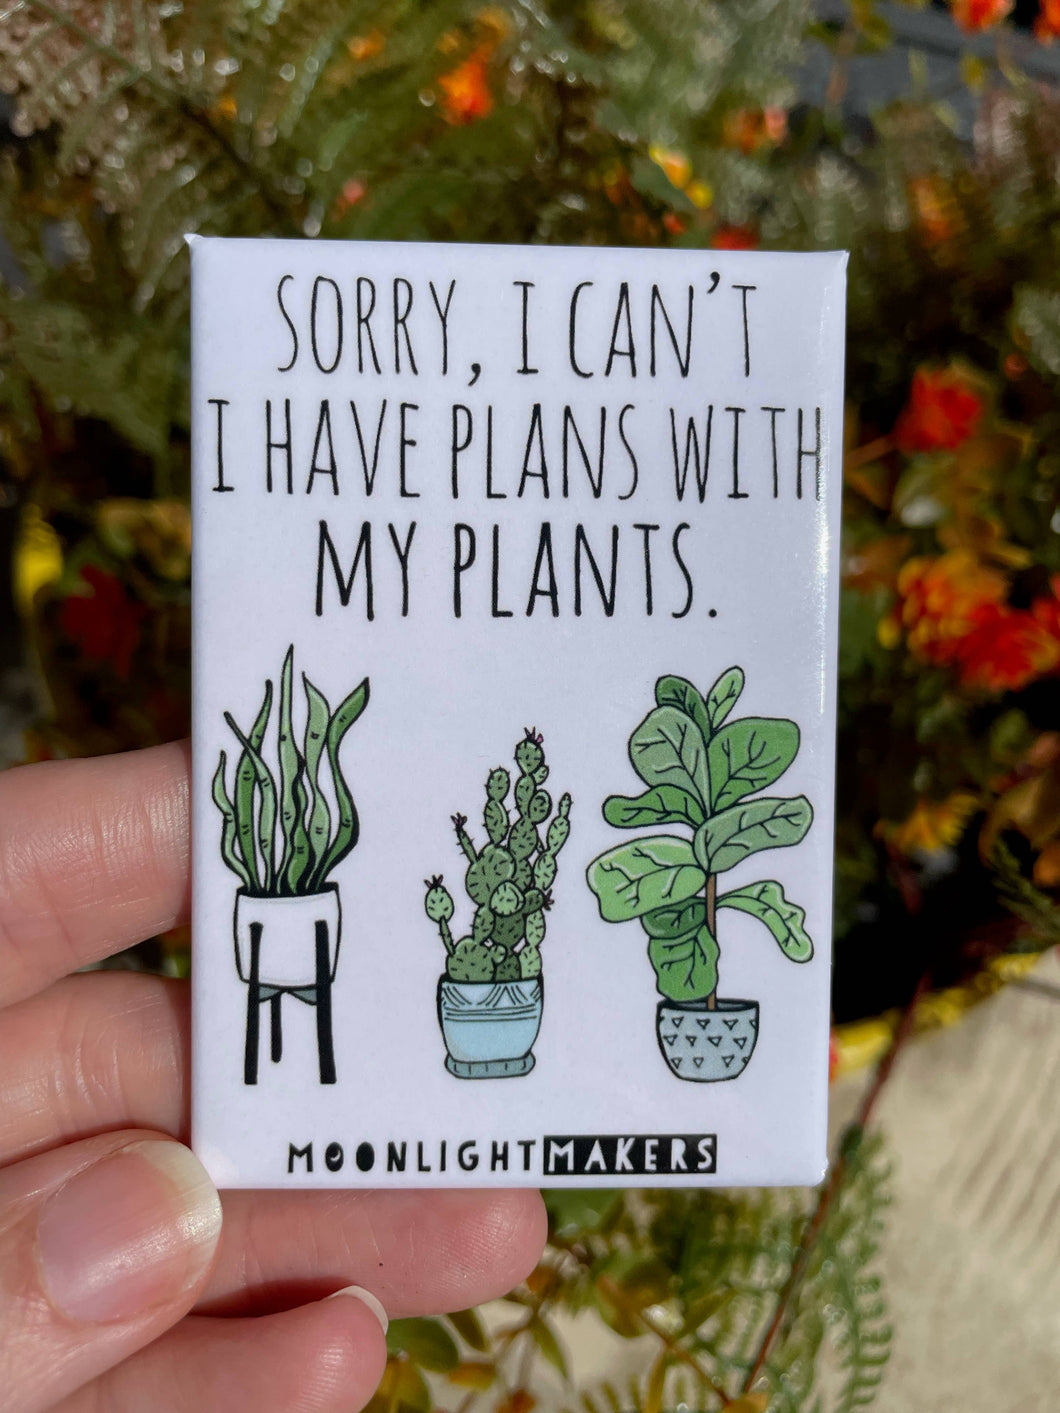 Sorry I Have Plans With My Plants - Funny Fridge Magnets